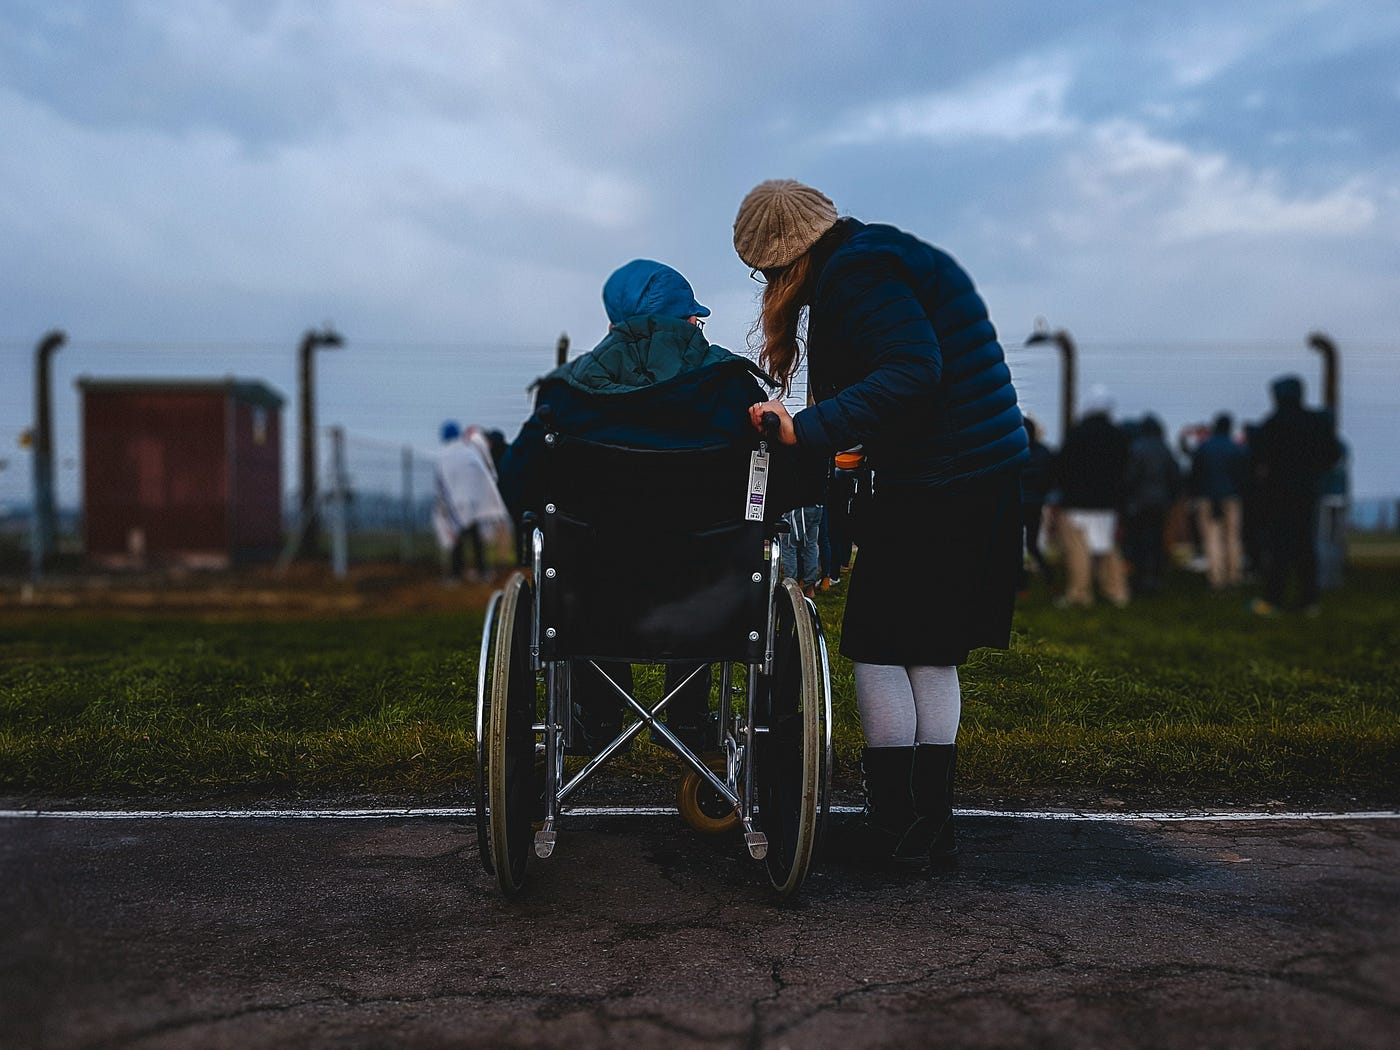 A Holocaust survivor in a wheelchair with a woman standing. They are watching Jewish youth playing in the death camp Auschwitz,